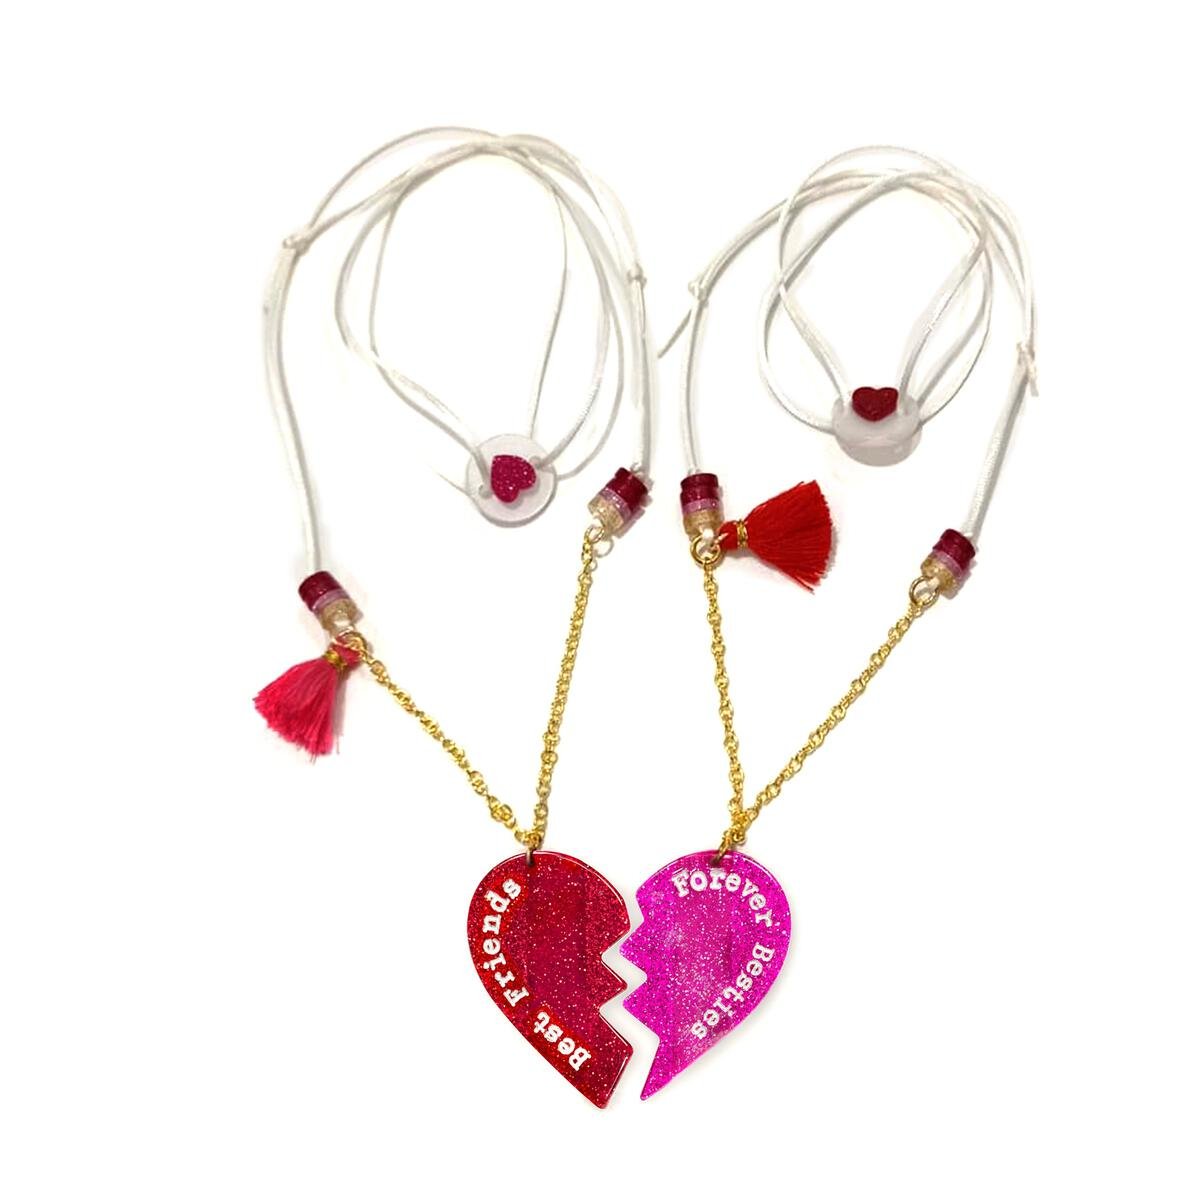 BEST FRIENDS FOREVER HEARTS NECKLACE (PREORDER) - LILIES & ROSES